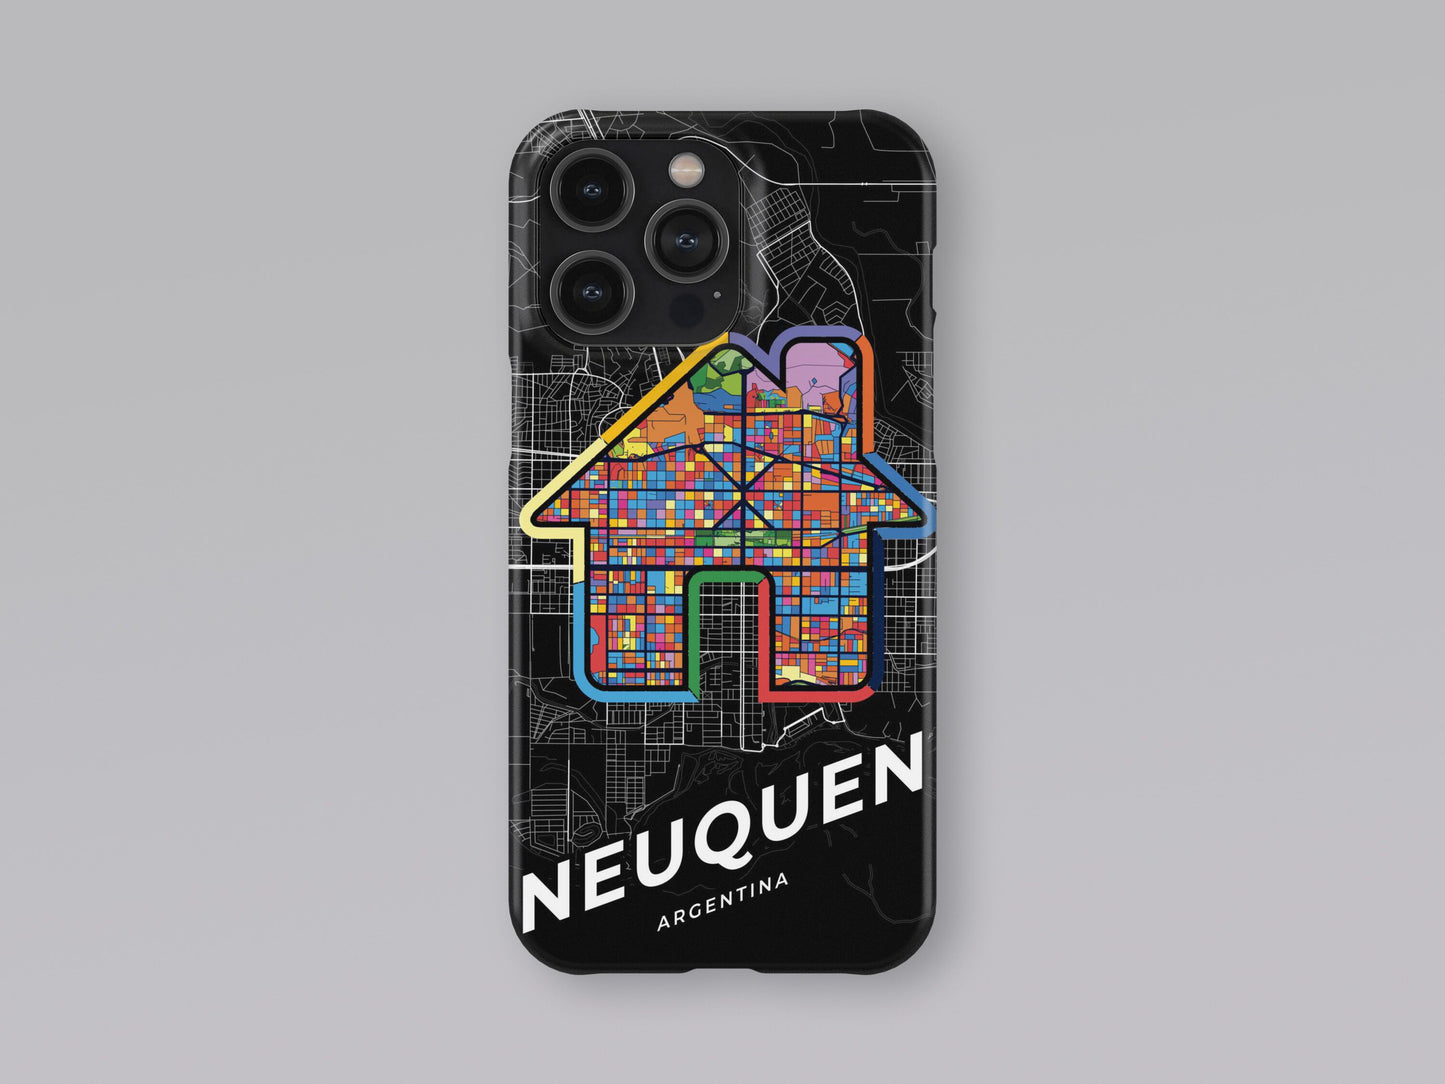 Neuquen Argentina slim phone case with colorful icon 3